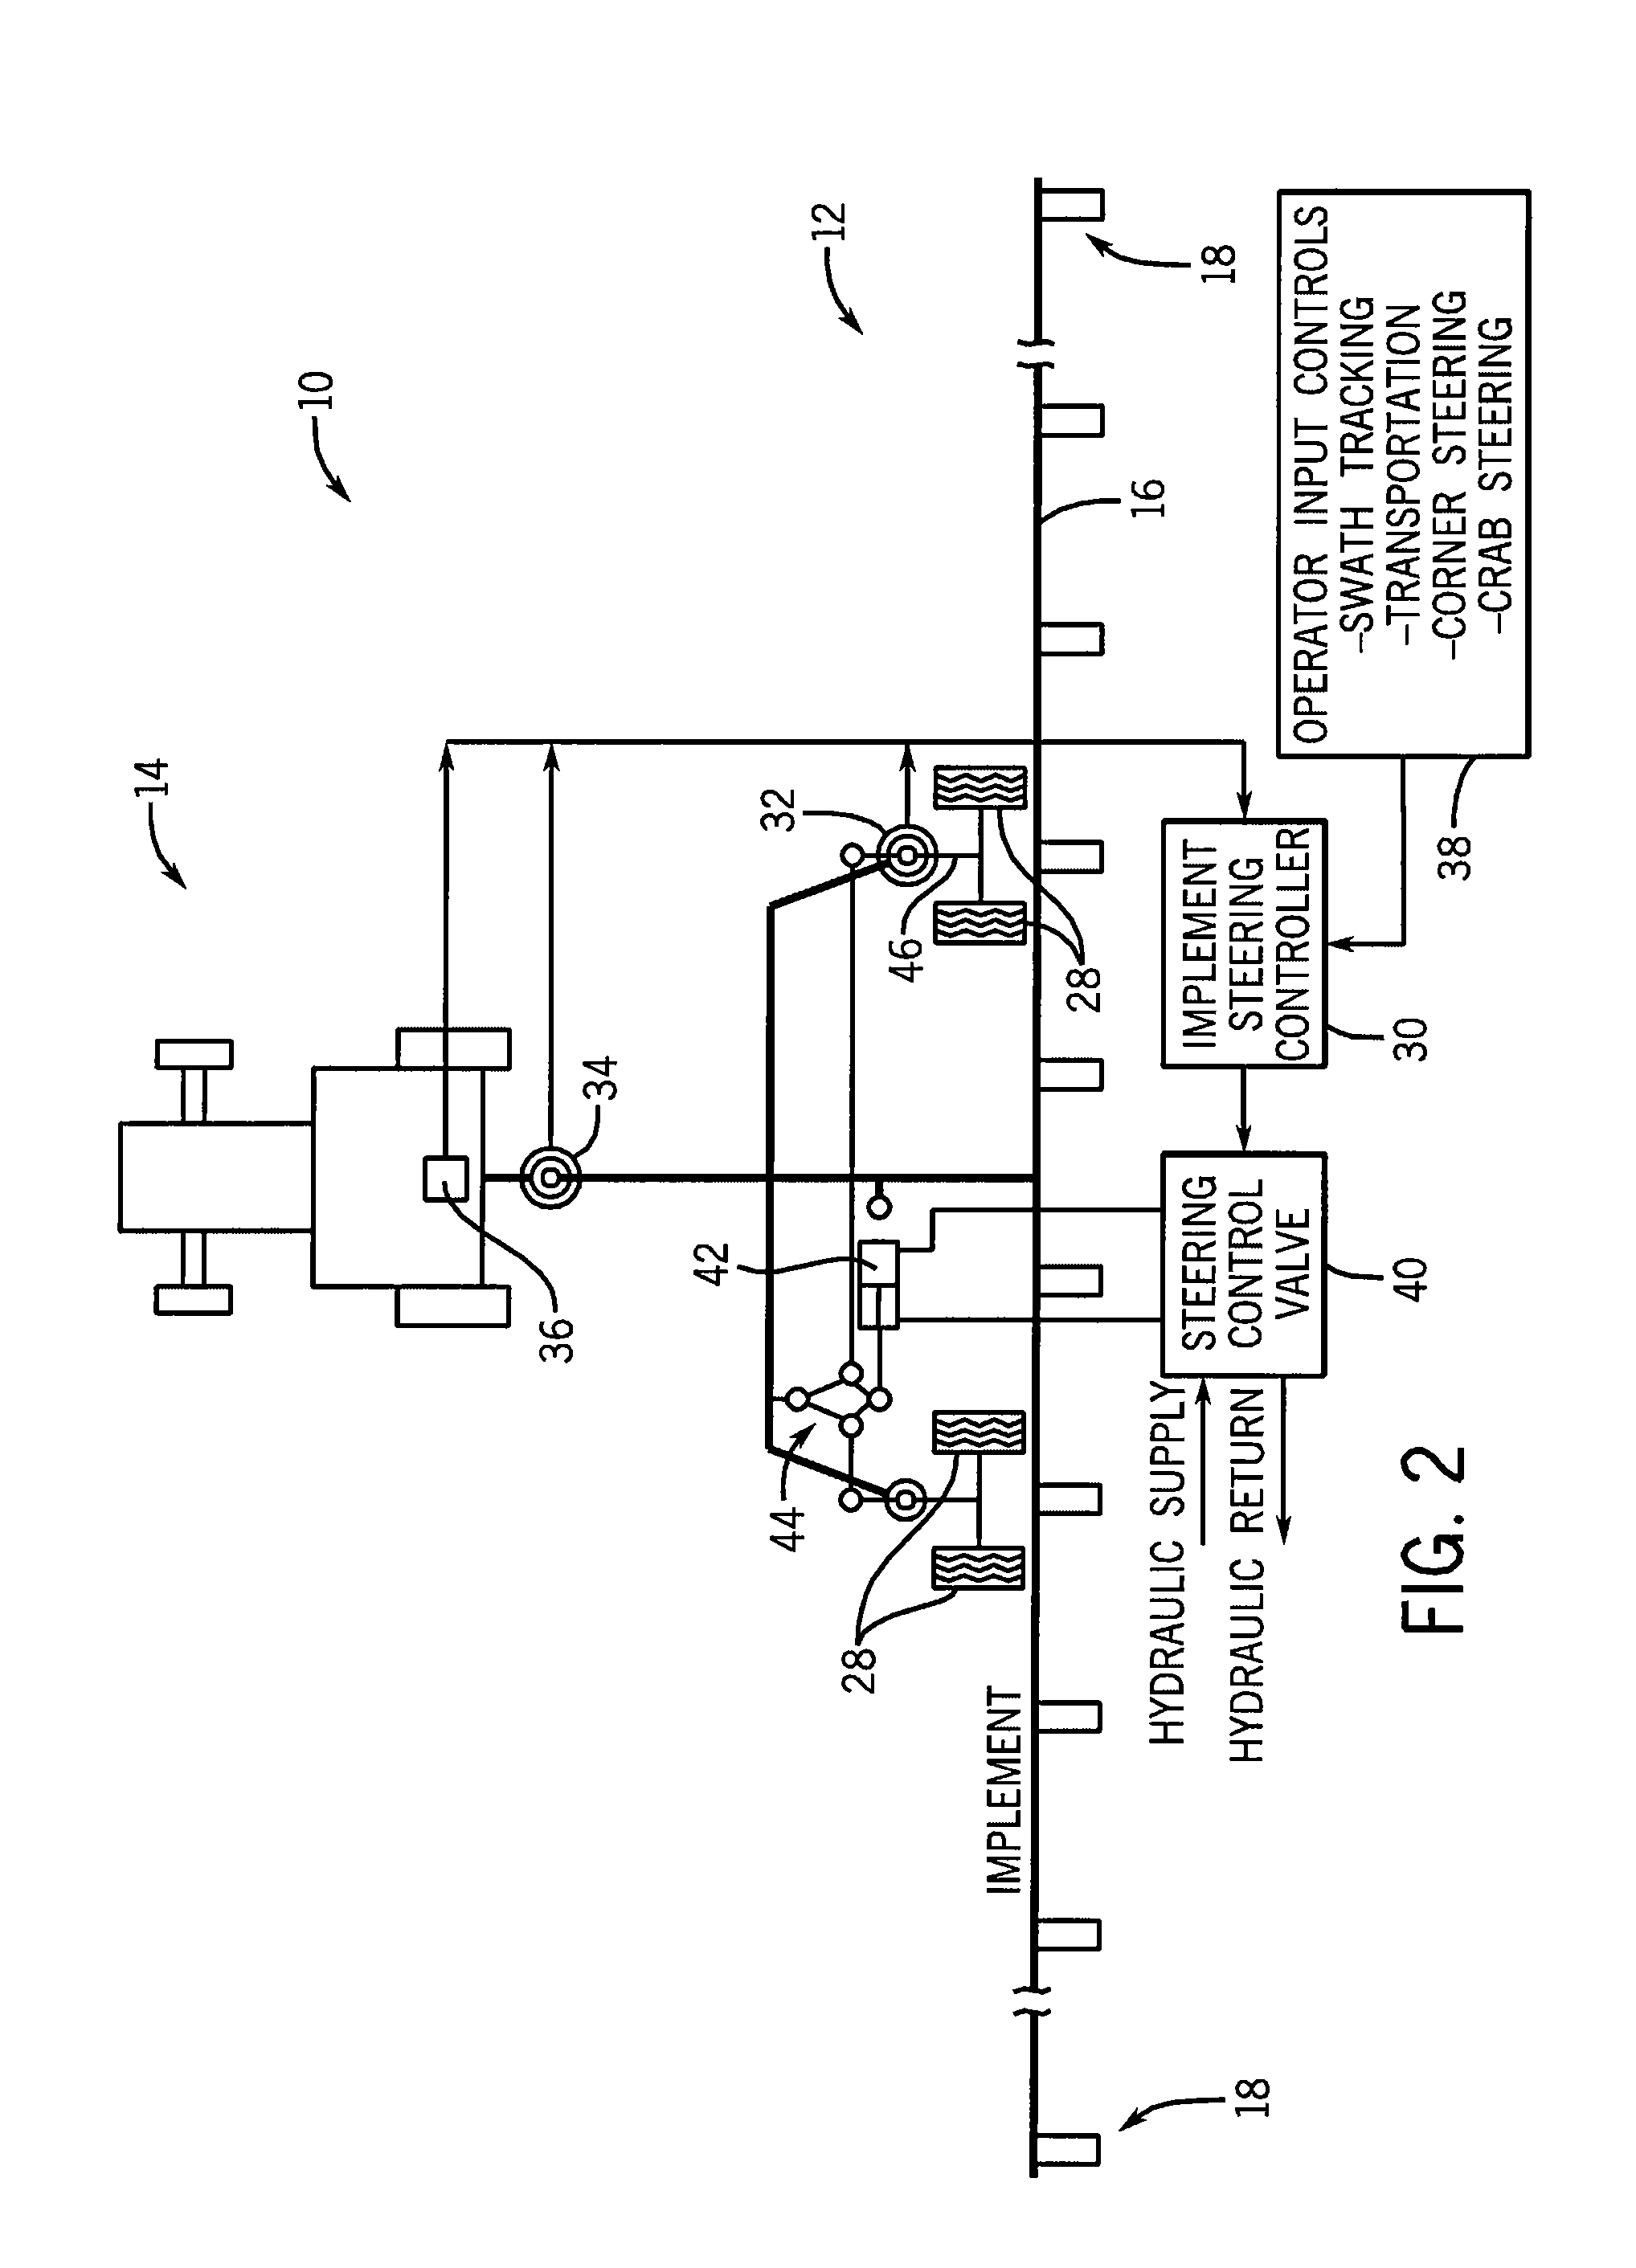 Towable Agricultural Implement Having Automatic Steering System